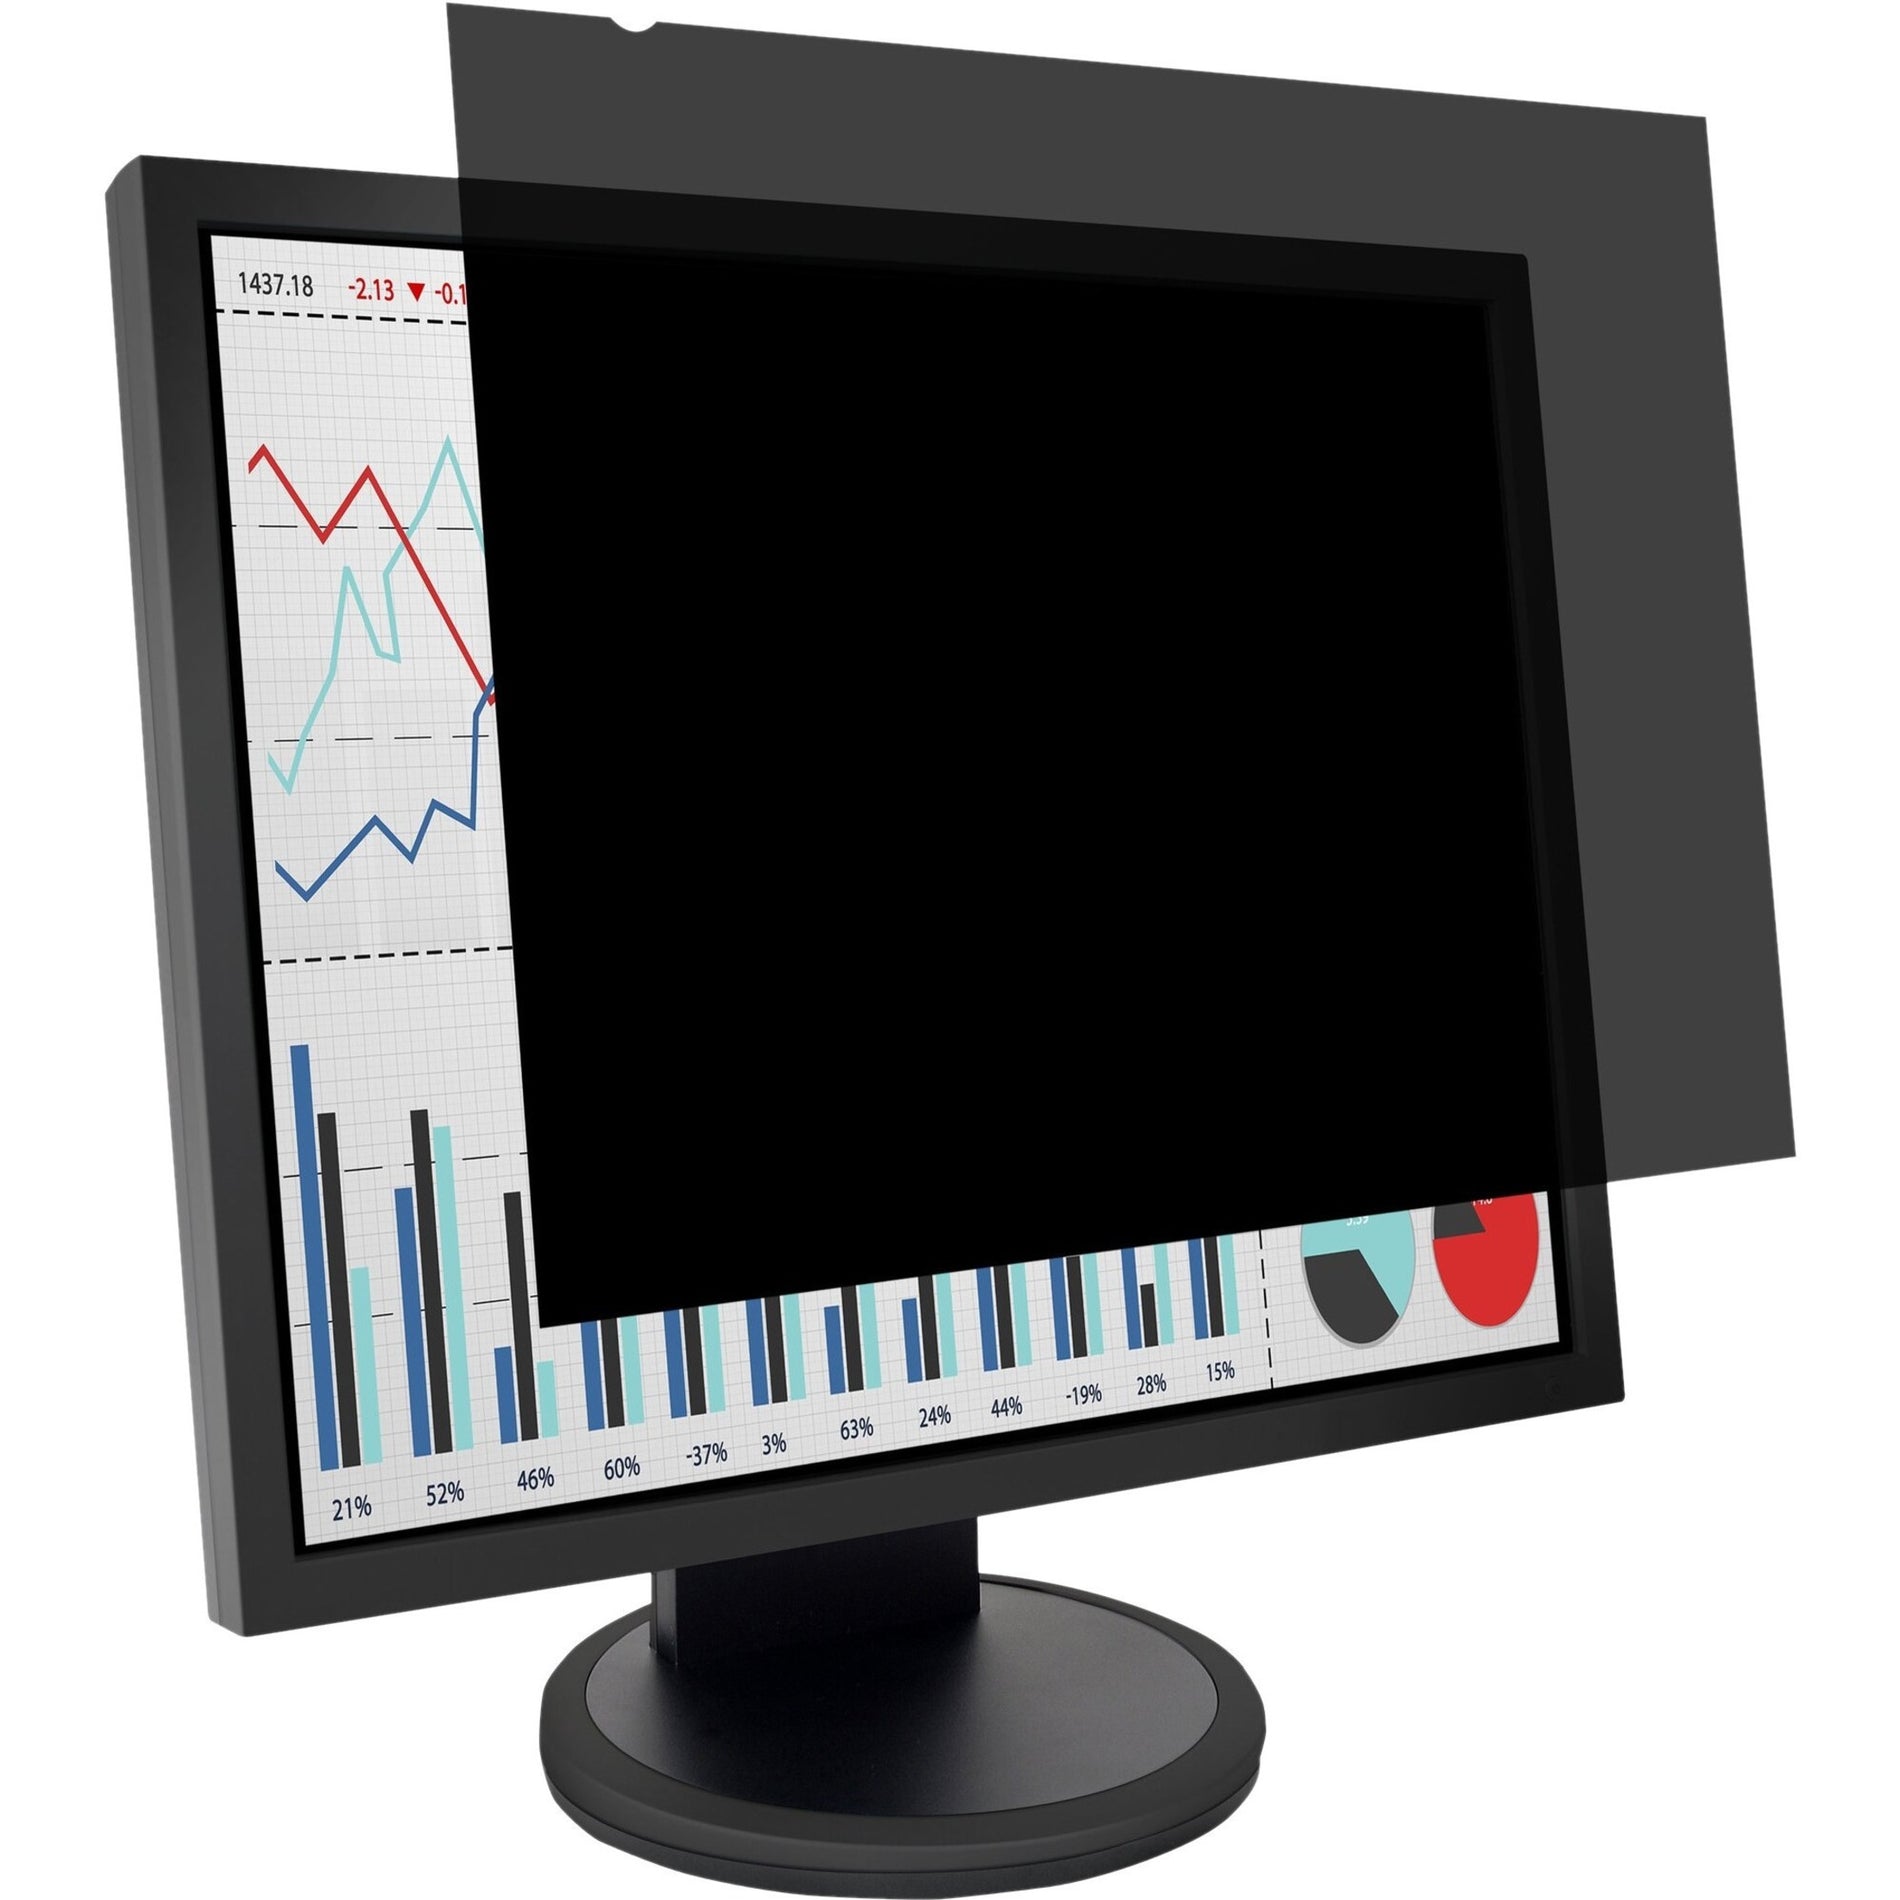 Kensington K52105WW FP170 Privacy Screen for 19 Monitors (5:4), Smooth Touch Coating, Blue Light Reduction, Anti-reflective